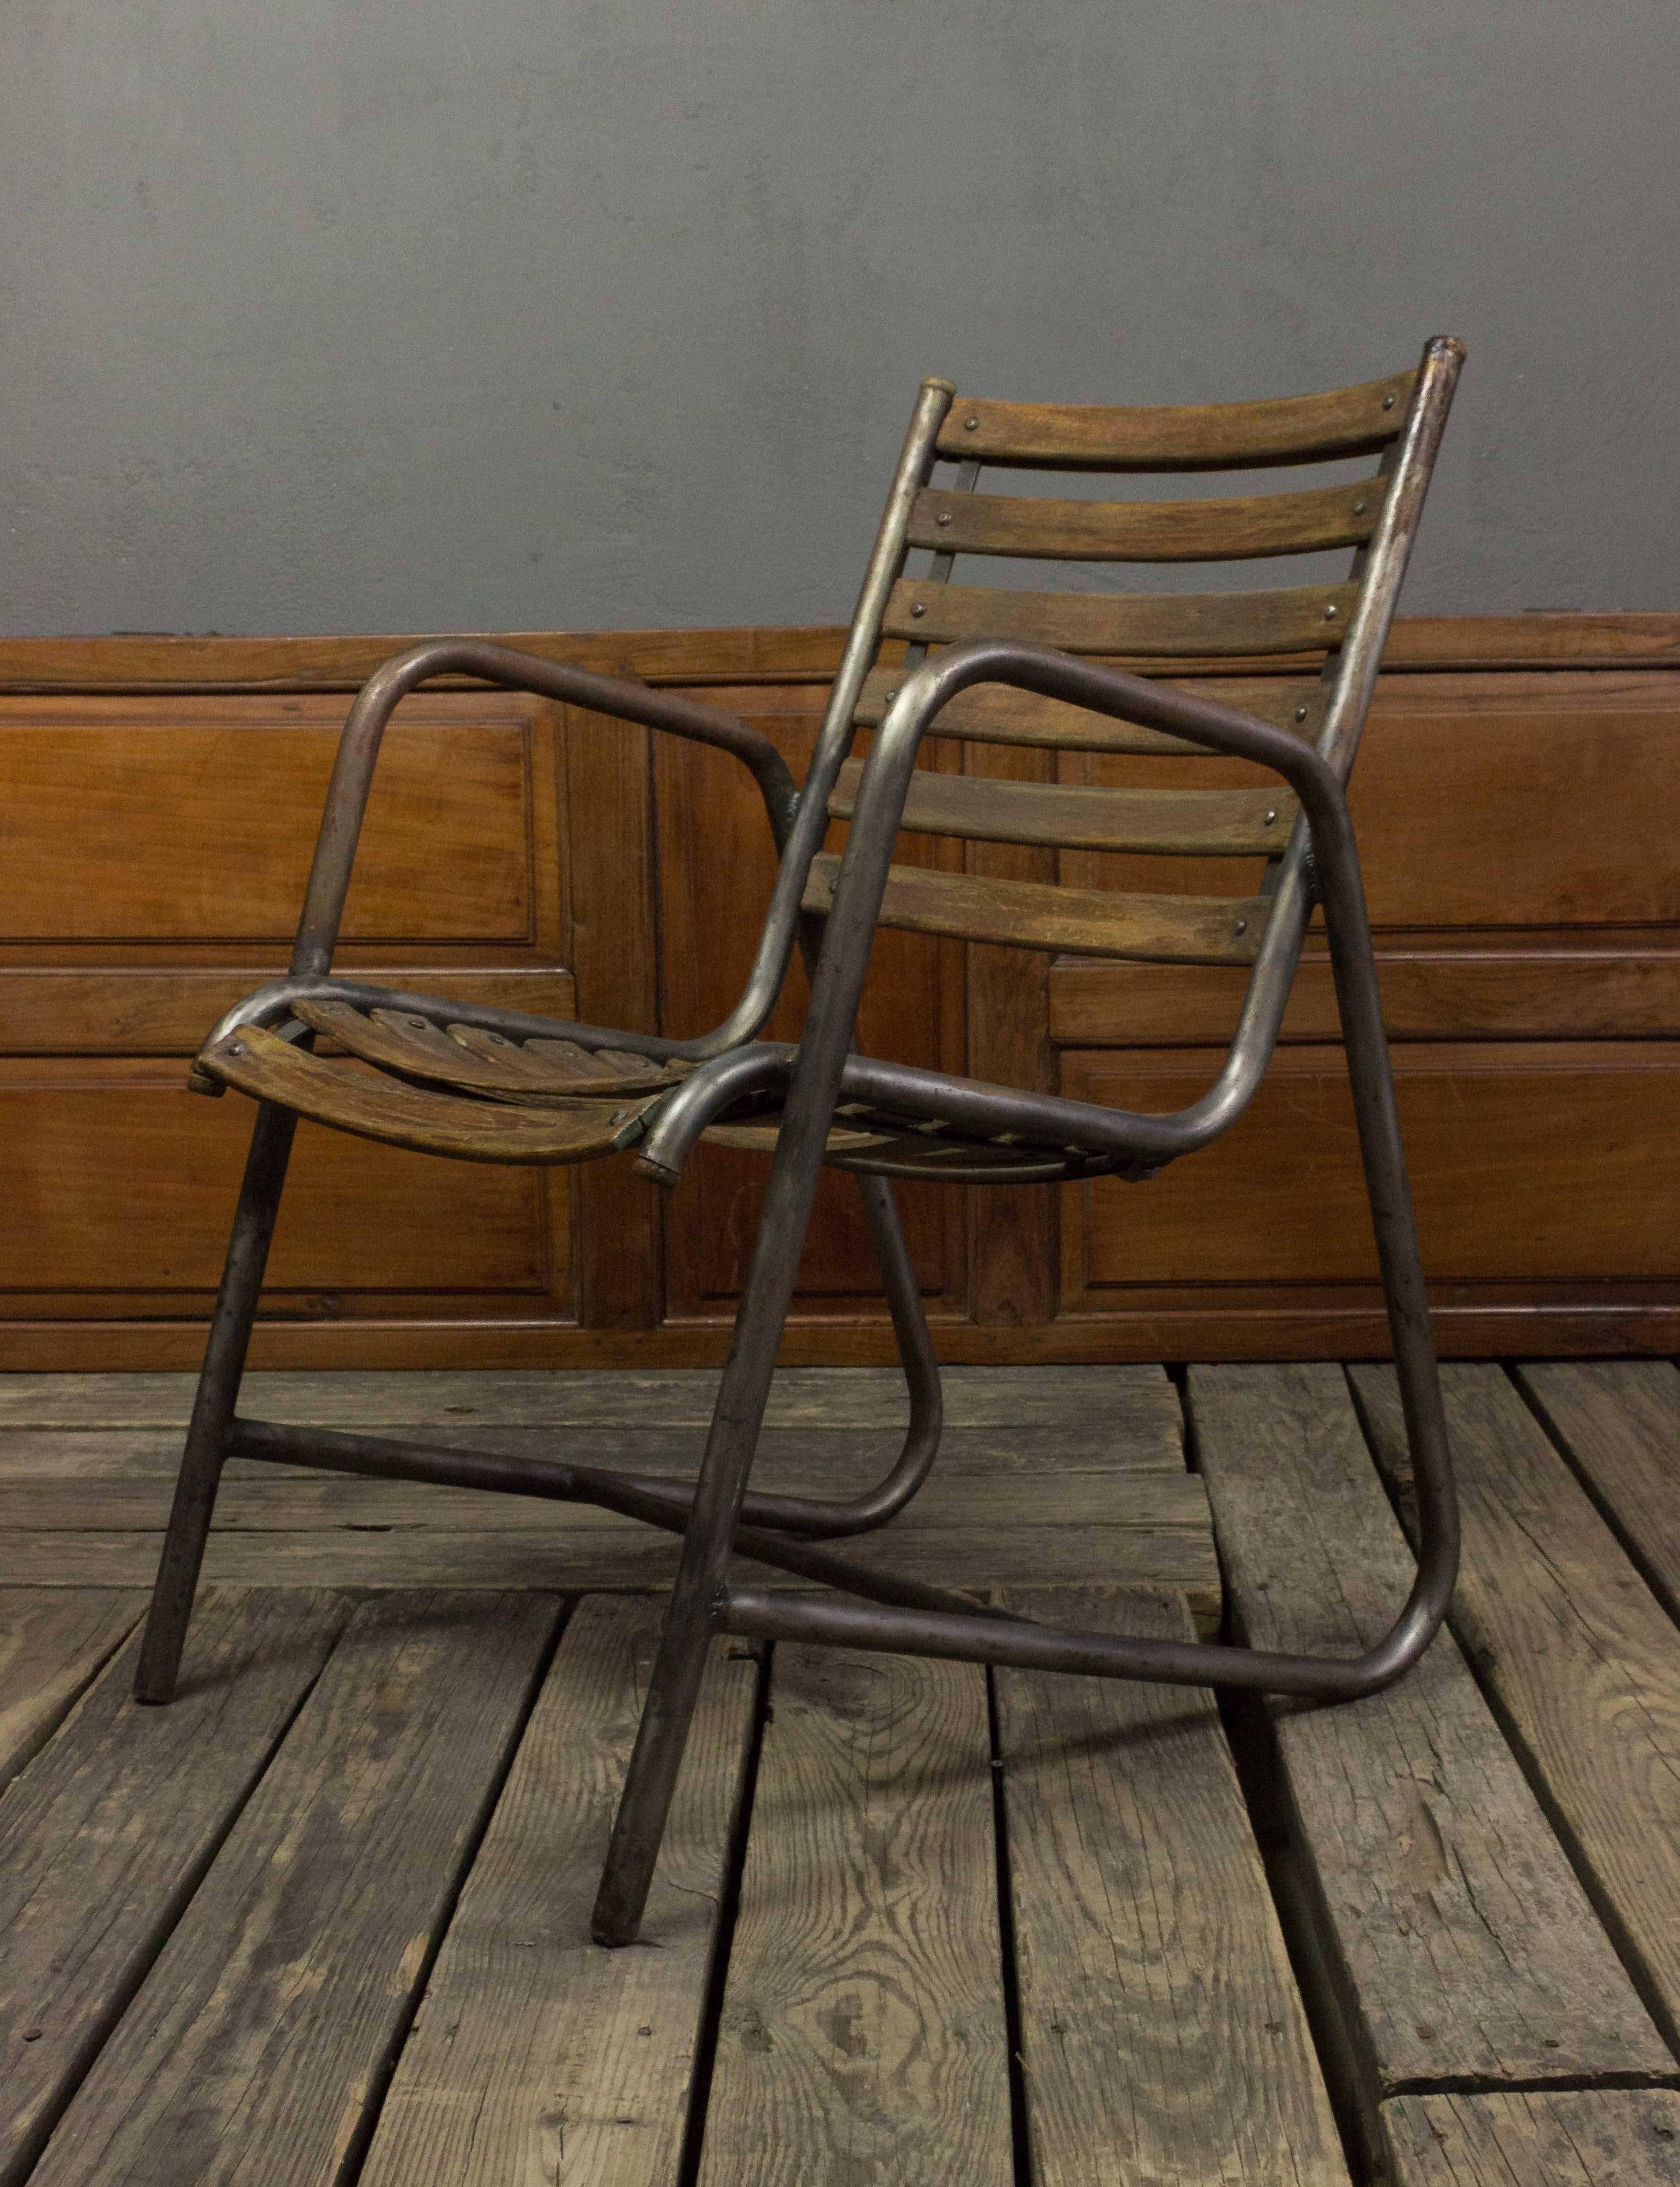 Mid-20th Century American Mid-Century Iron and Wood Garden Chairs